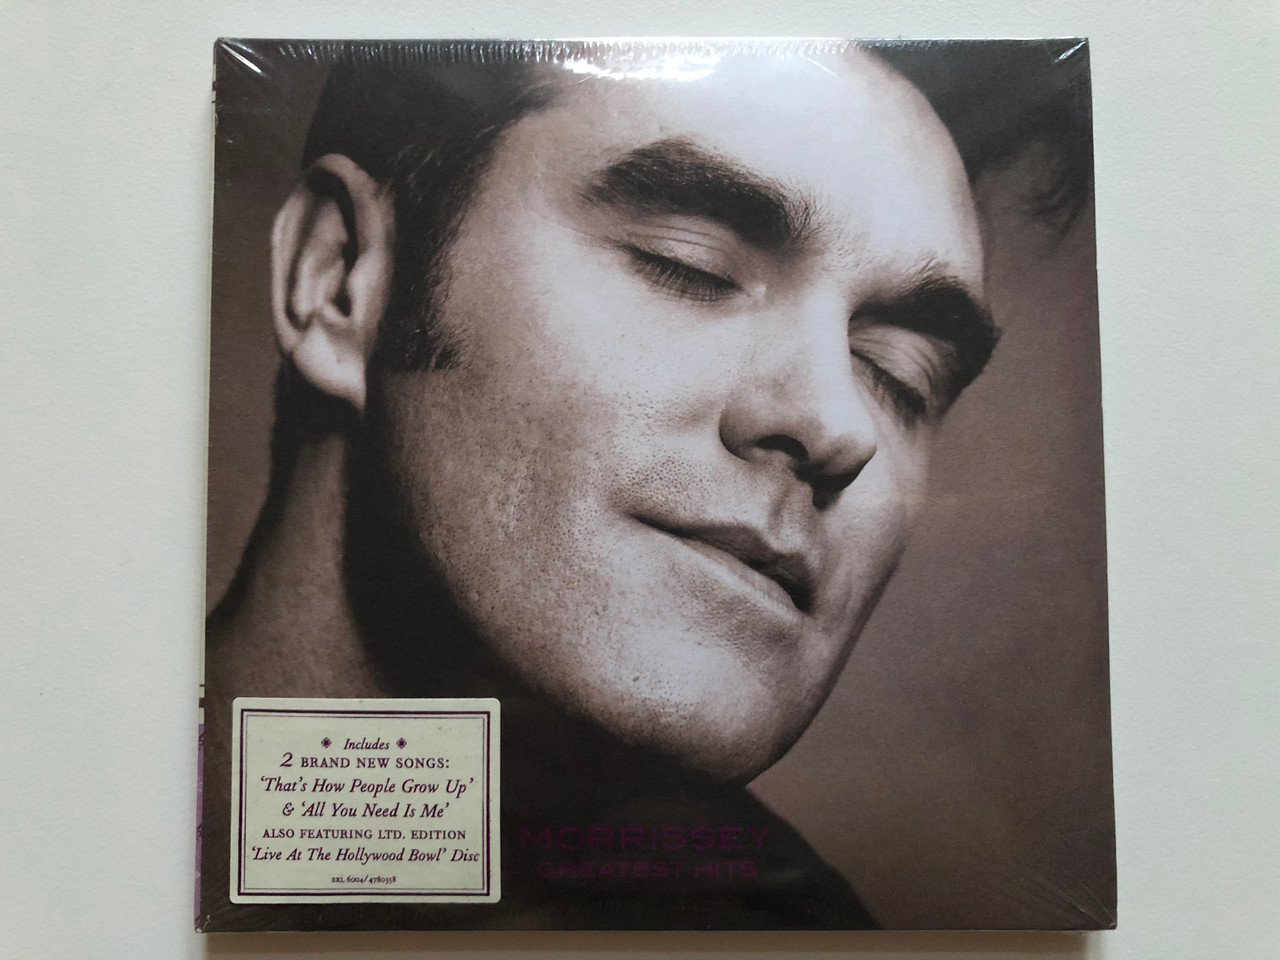 https://cdn10.bigcommerce.com/s-62bdpkt7pb/products/0/images/204515/Morrissey_Greatest_Hits_Includes_2_Brand_Songs_Thats_How_People_Grow_Up_All_You_Need_Is_Me_also_featuring_ltd._edition_Live_At_The_Hollywood_Bowl_Disc_Decca_2x_Audio_CD_SKL6004_1__49868.1641367198.1280.1280.JPG?c=2&_gl=1*ozf4kd*_ga*MjA2NTIxMjE2MC4xNTkwNTEyNTMy*_ga_WS2VZYPC6G*MTY0MTM1OTgzNy4yNDcuMS4xNjQxMzY3MDA0LjM5